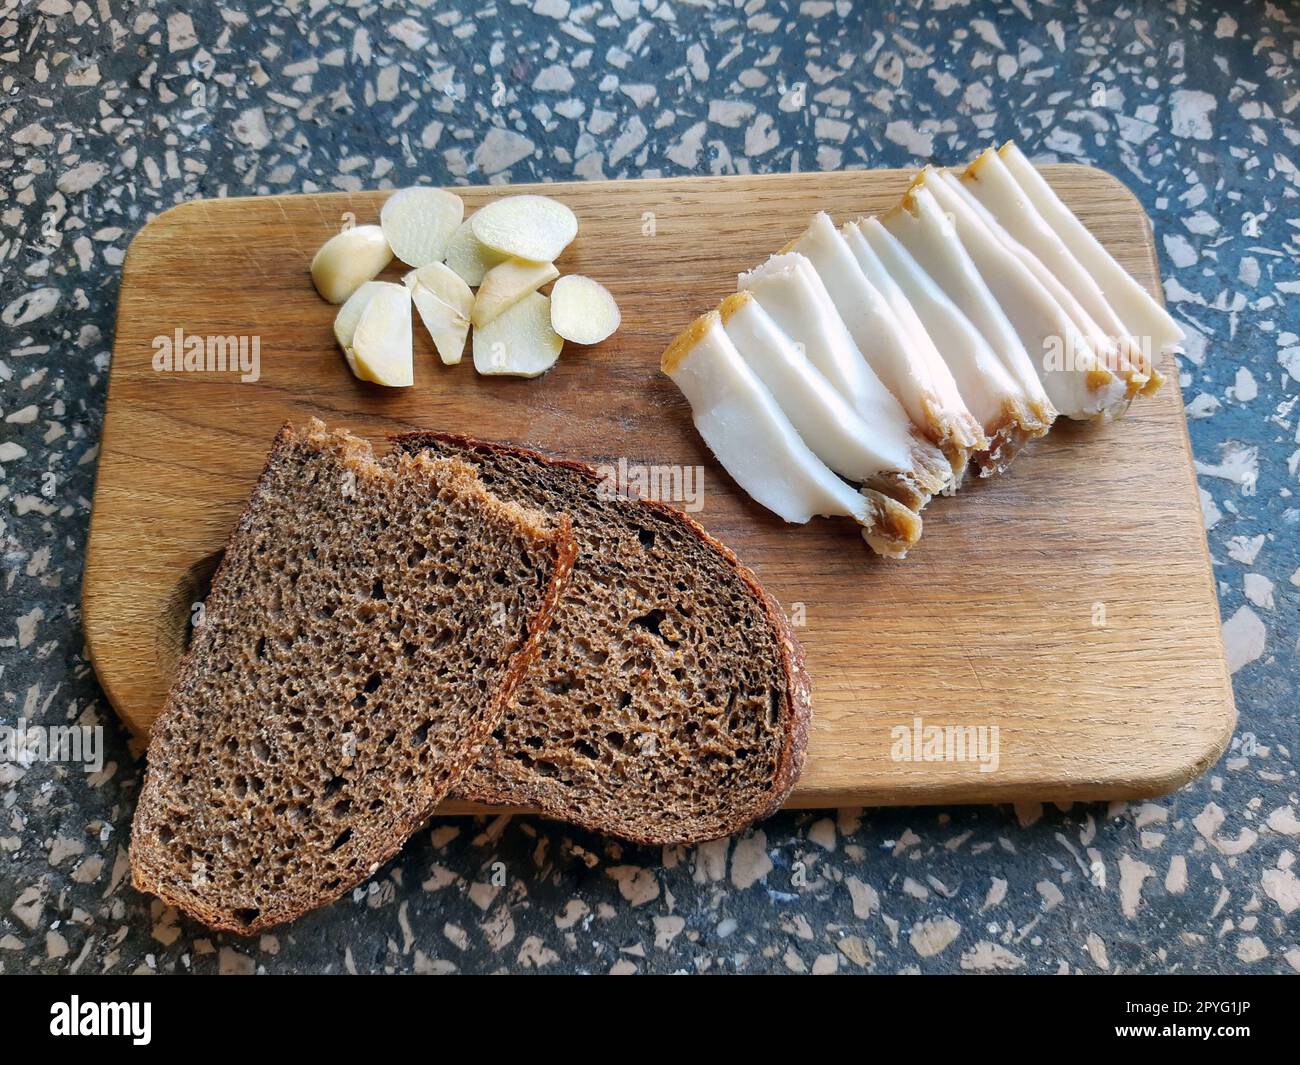 Salo bread and garlic on a wooden board Stock Photo